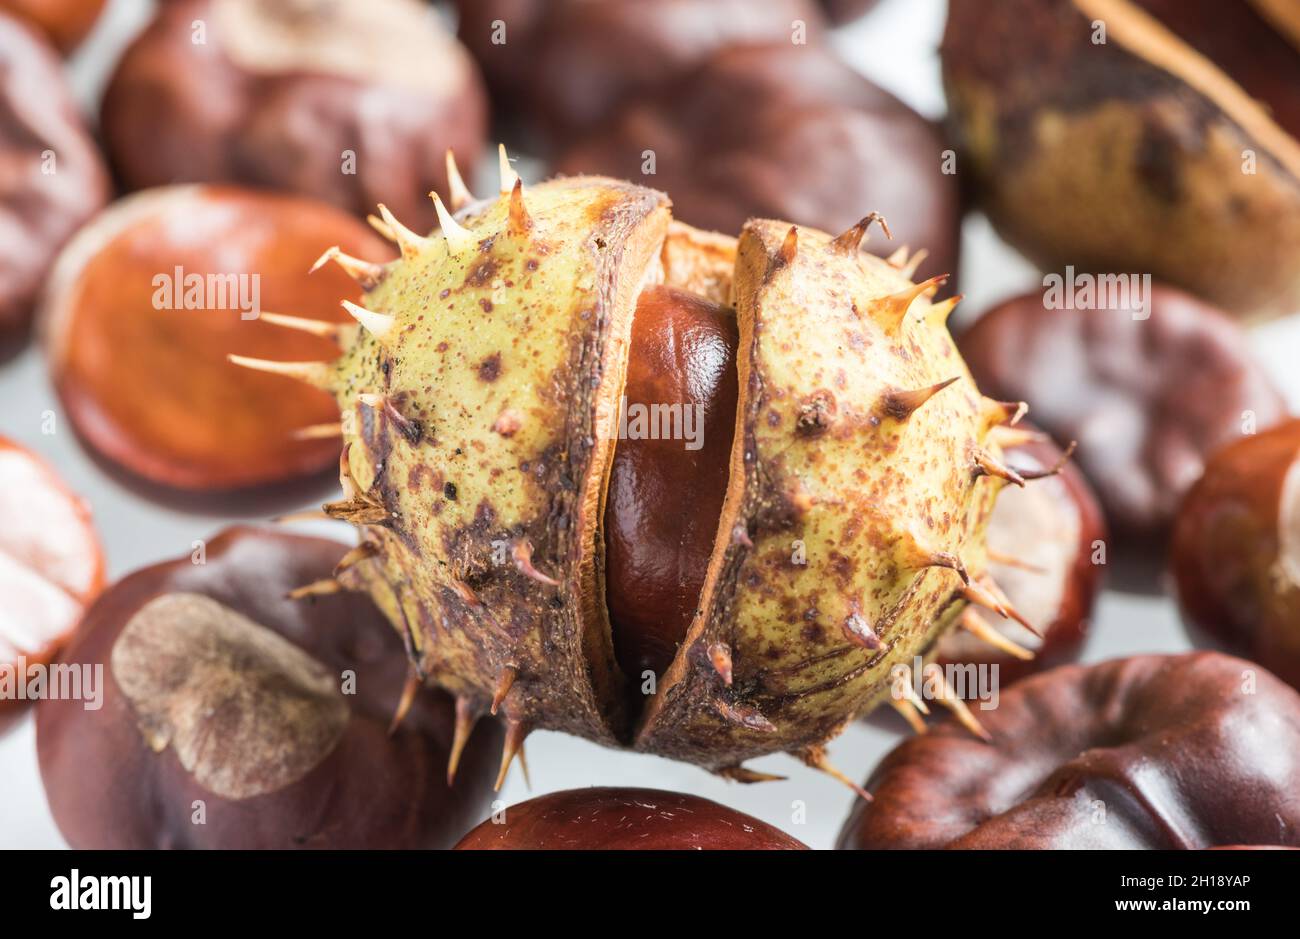 A seed from the Horse Chestnut tree (Aesculus hippocastanum) known in the UK as a conker Stock Photo